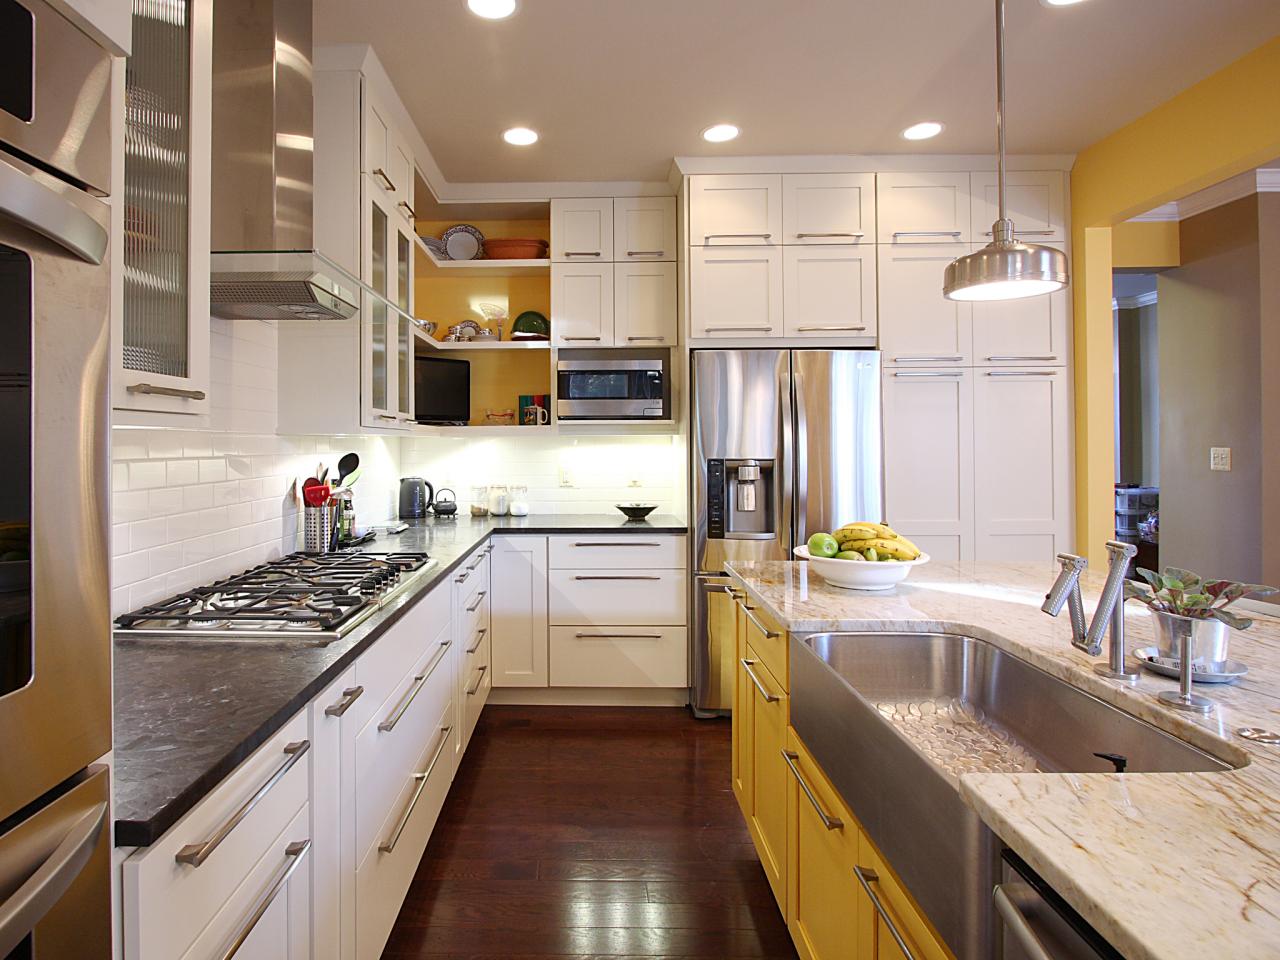 Building Kitchen Cabinets Pictures Ideas Tips From HGTV HGTV